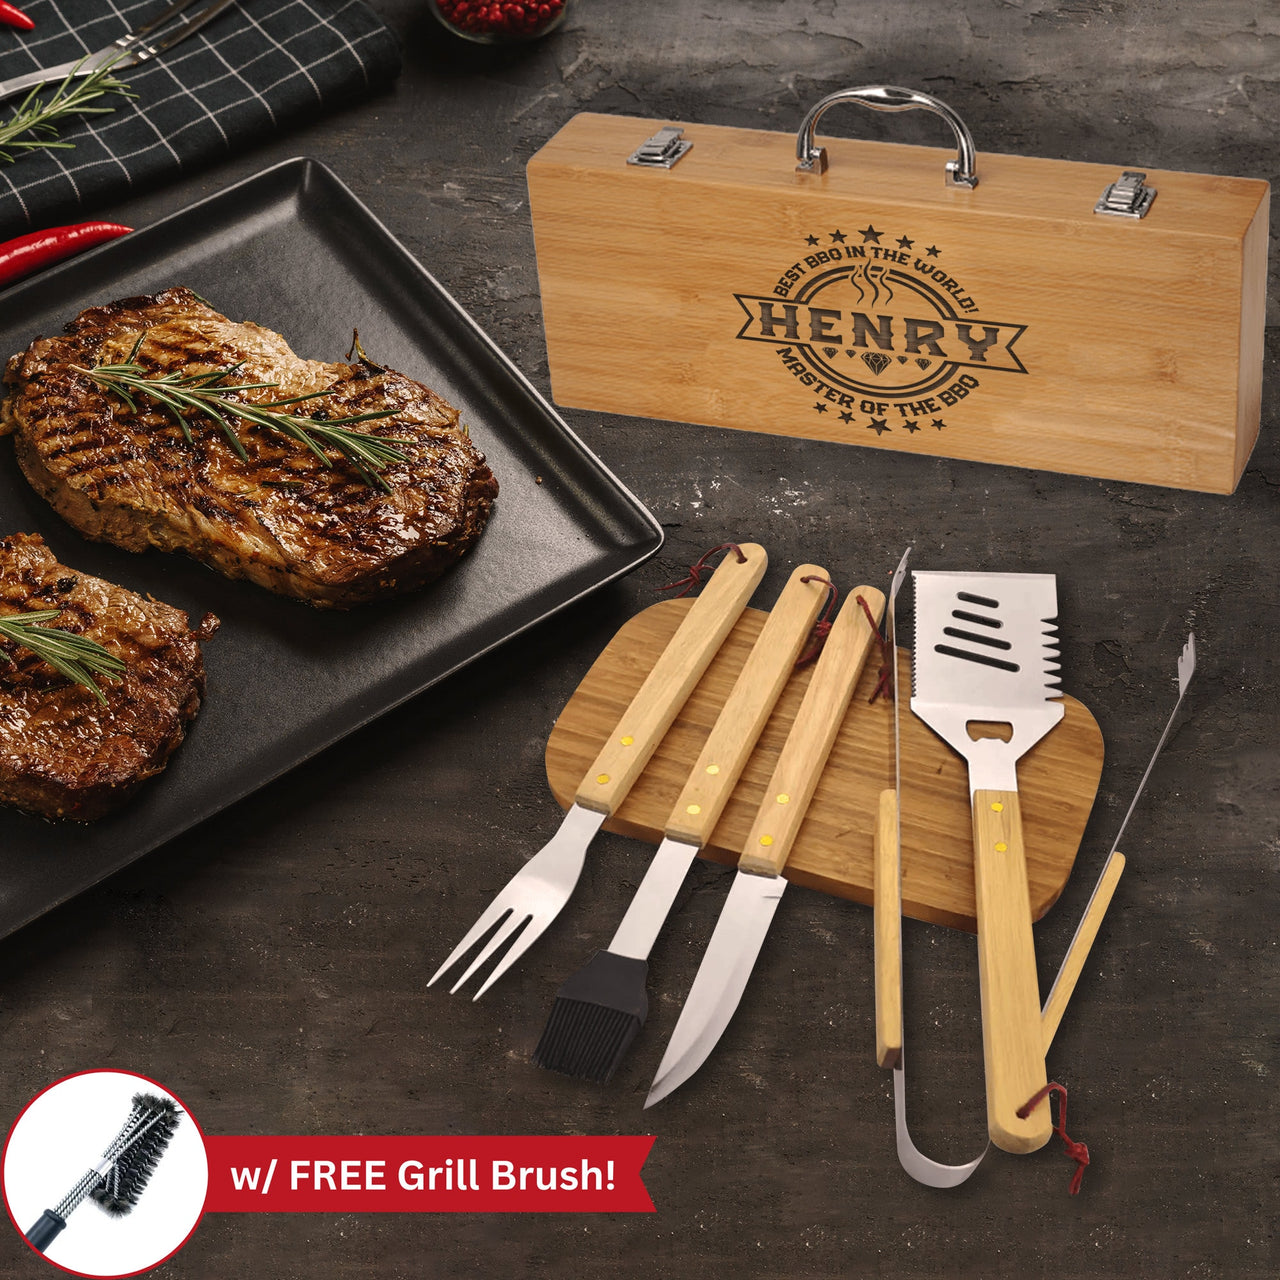 Customized 5-in-1 BBQ Tools, Outdoors